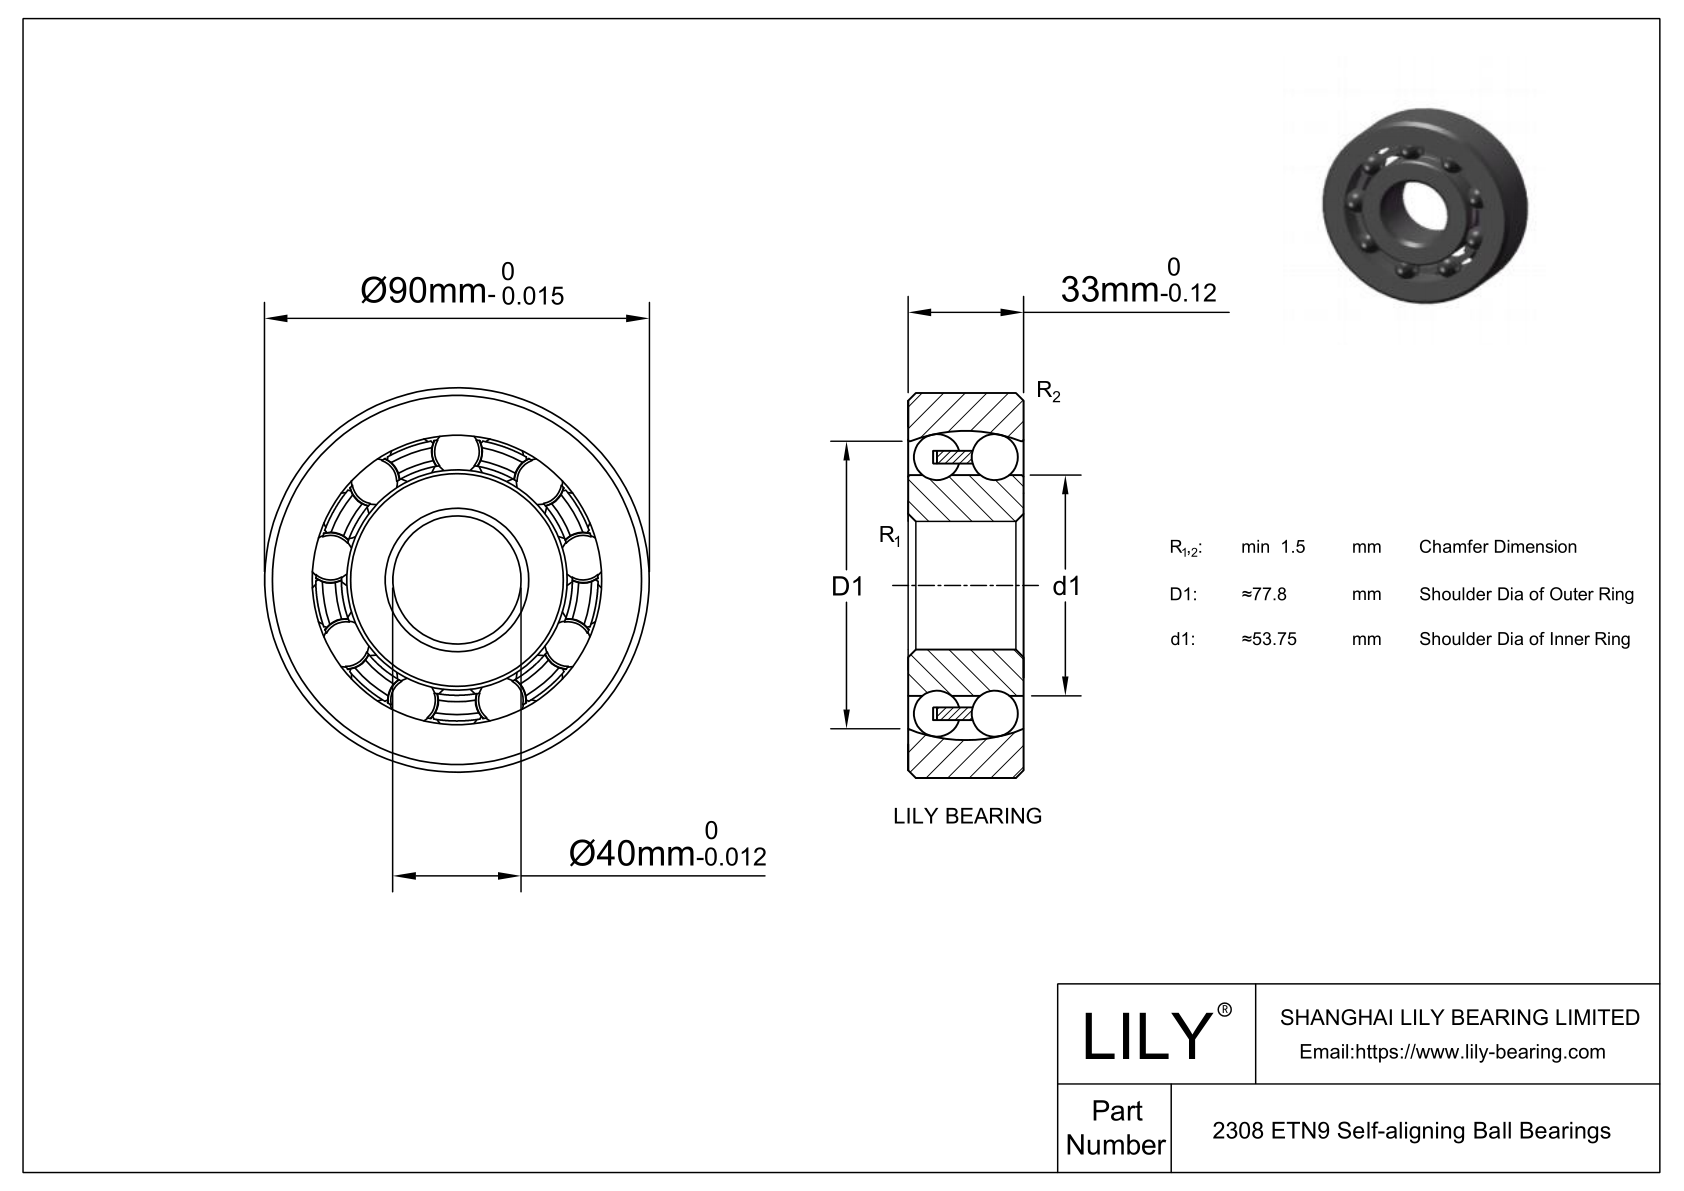 S2308 ETN9 Stainless Steel Self Aligning Ball Bearings cad drawing